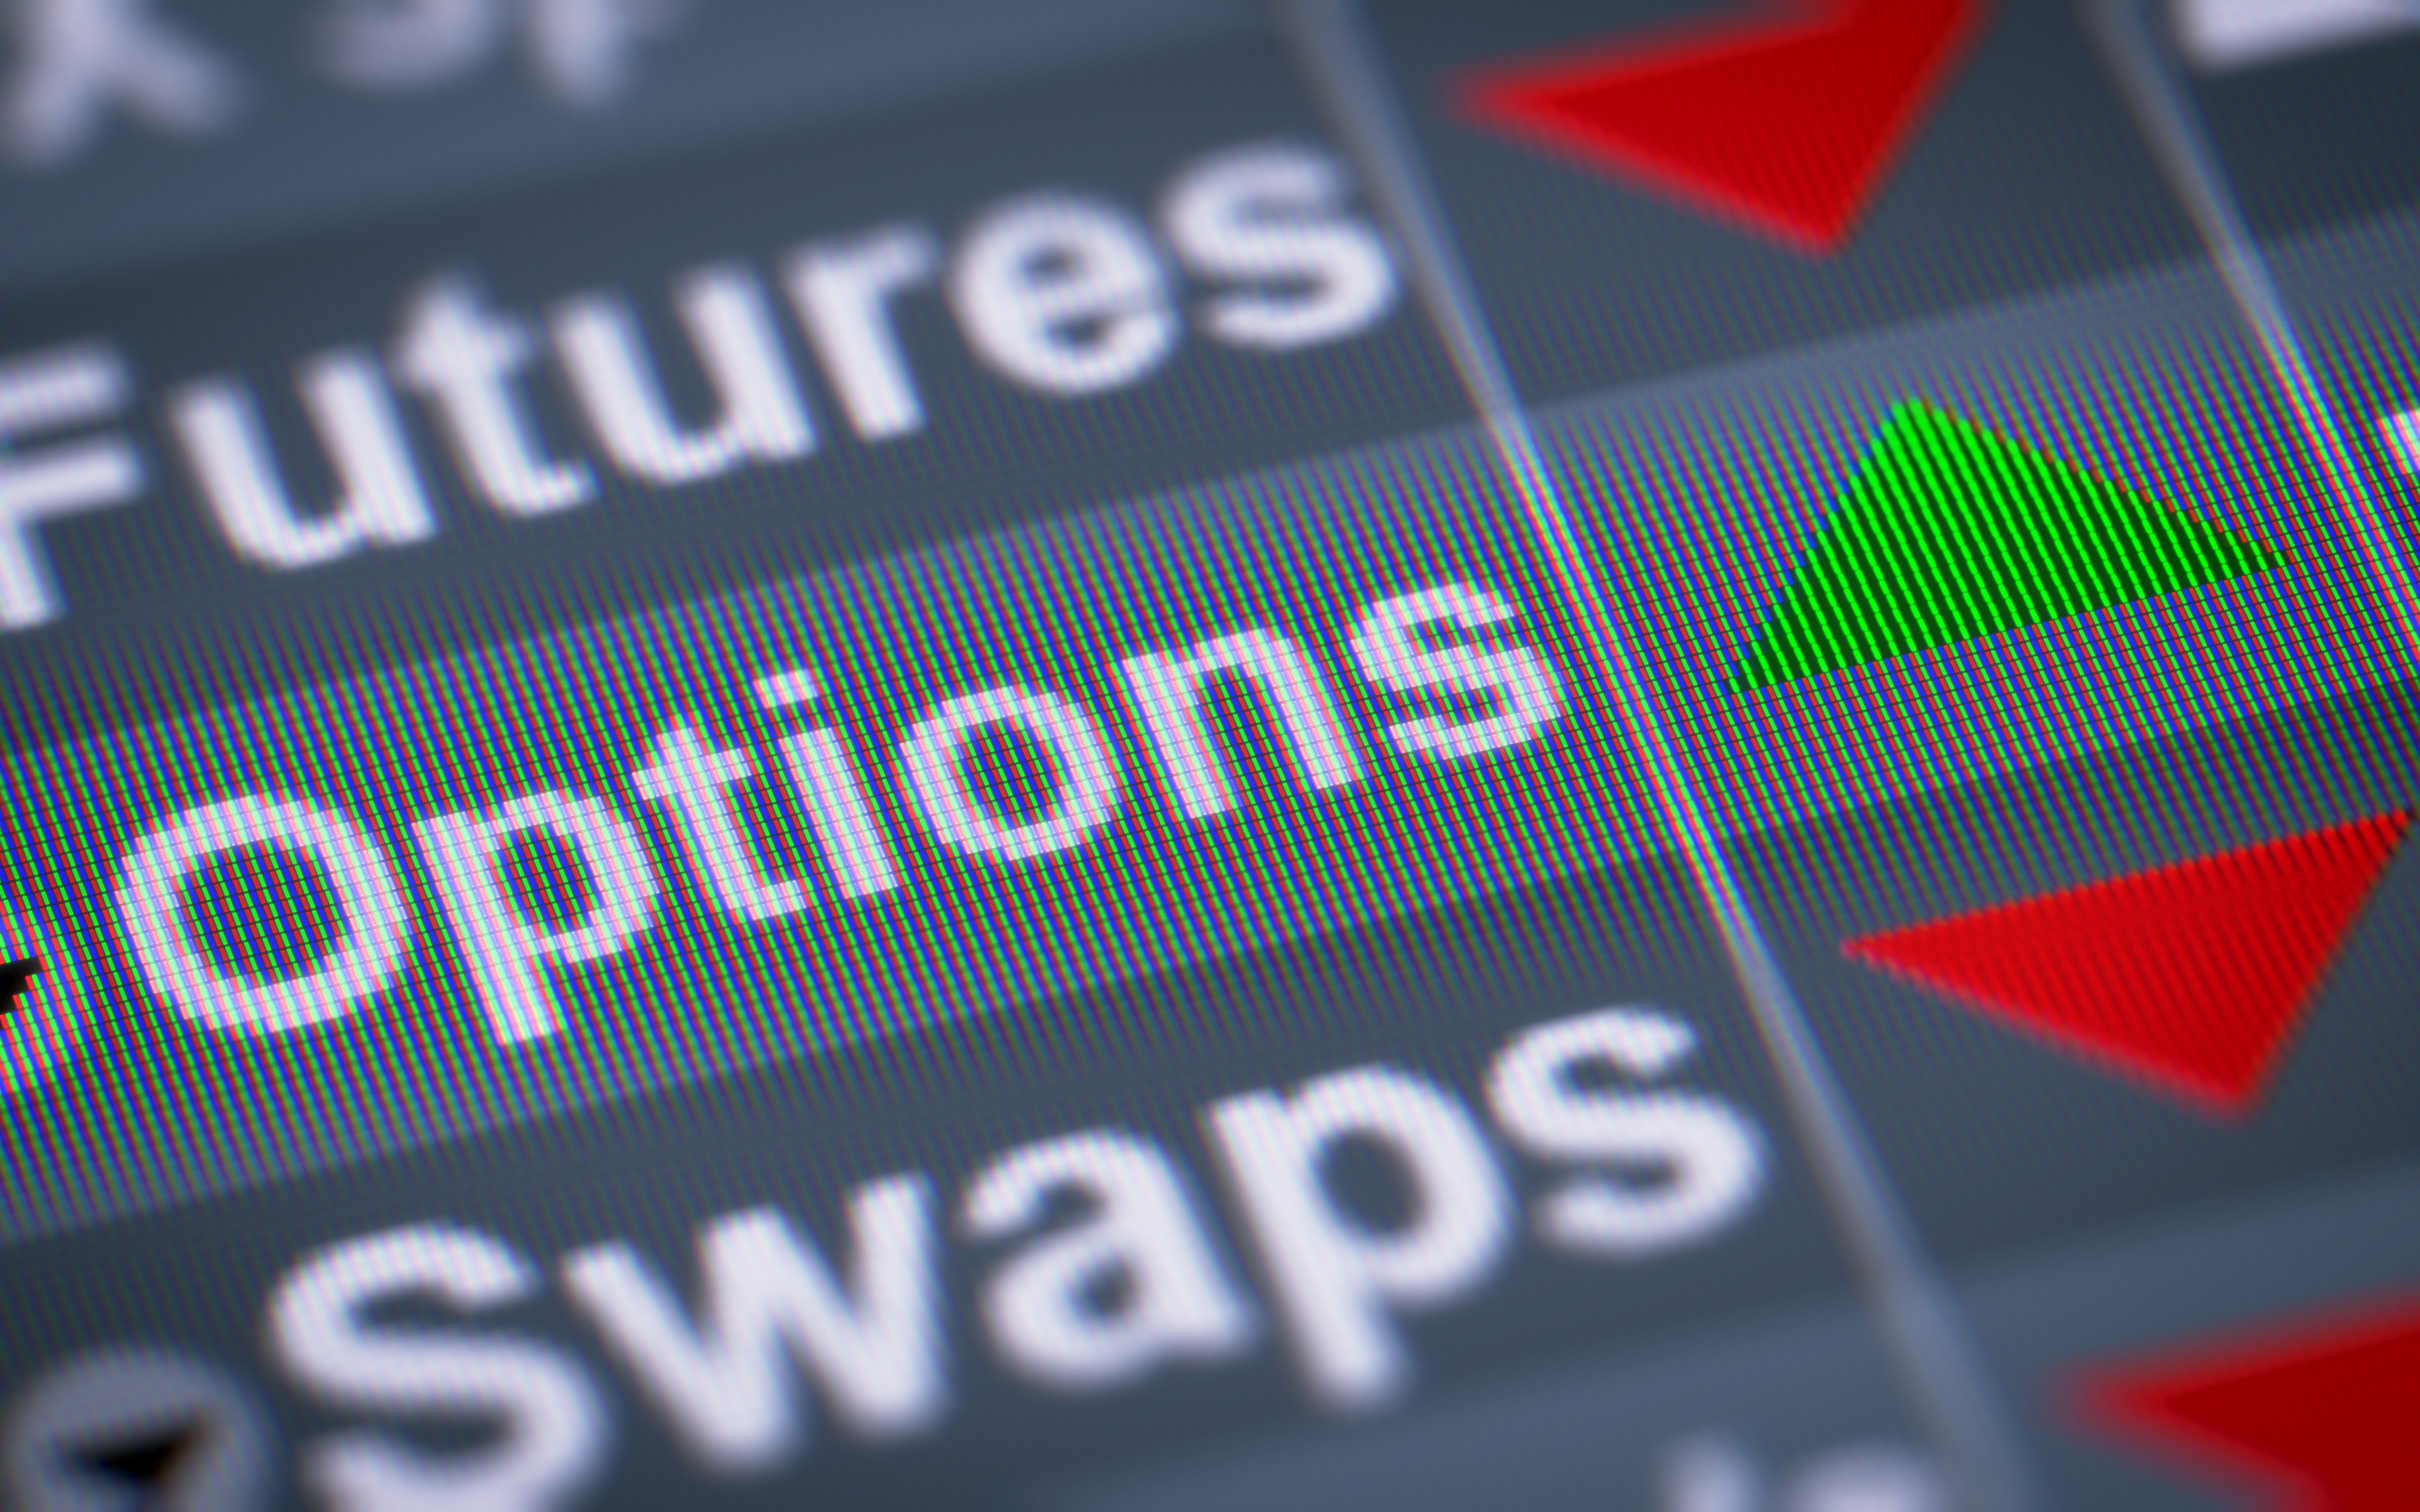 options trading, options swaps futures